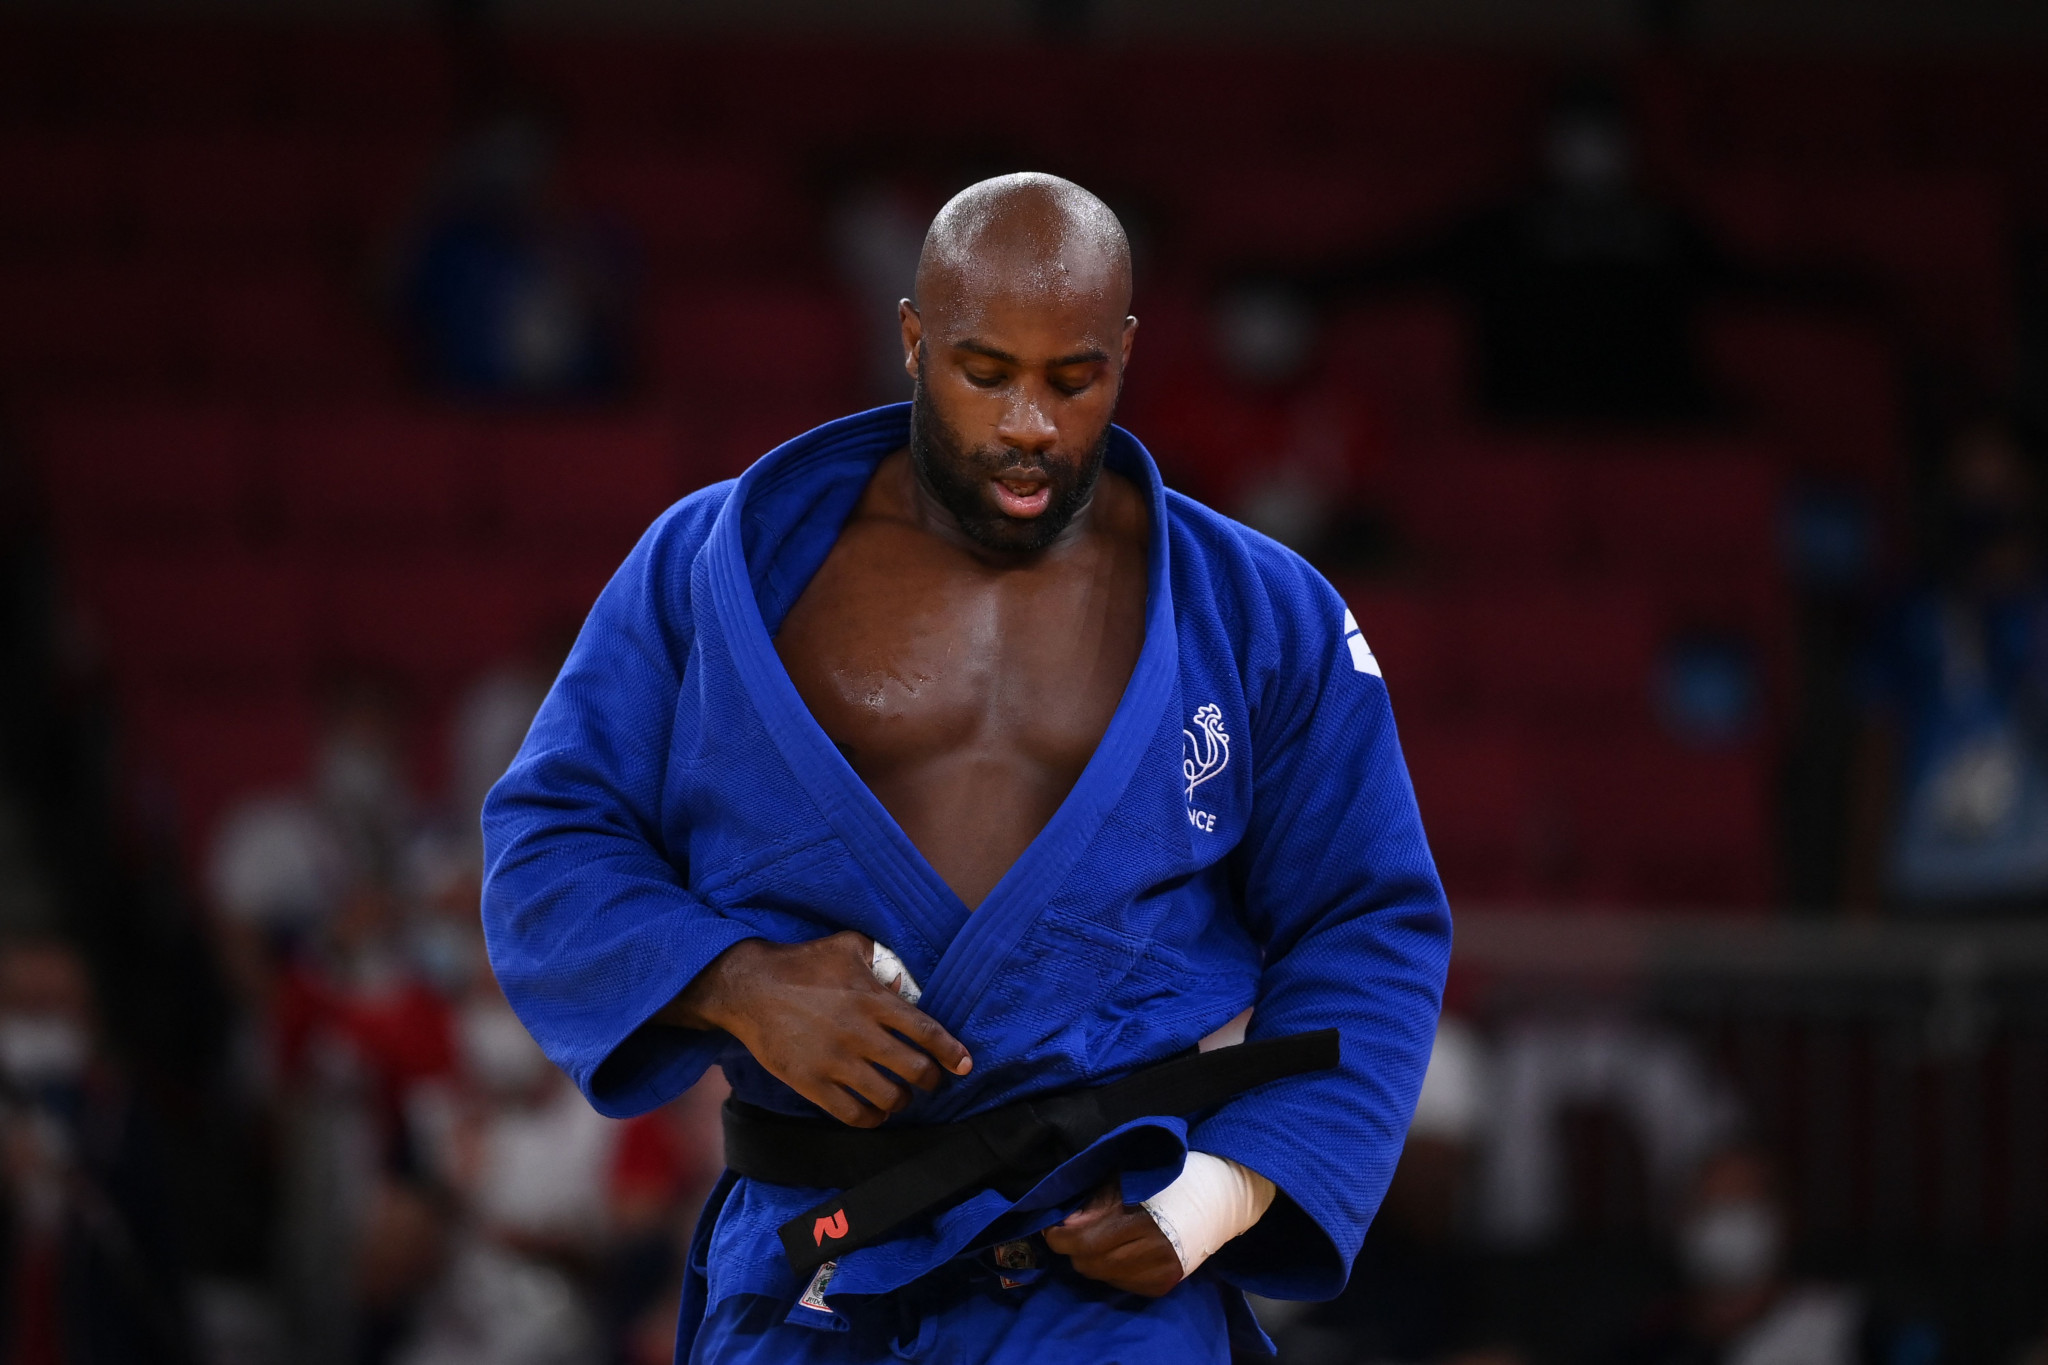 A bout between Teddy Riner of France, in picture, and Lukas Krpaleck of the Czech Republic has the potential to be entertaining ©Getty Images